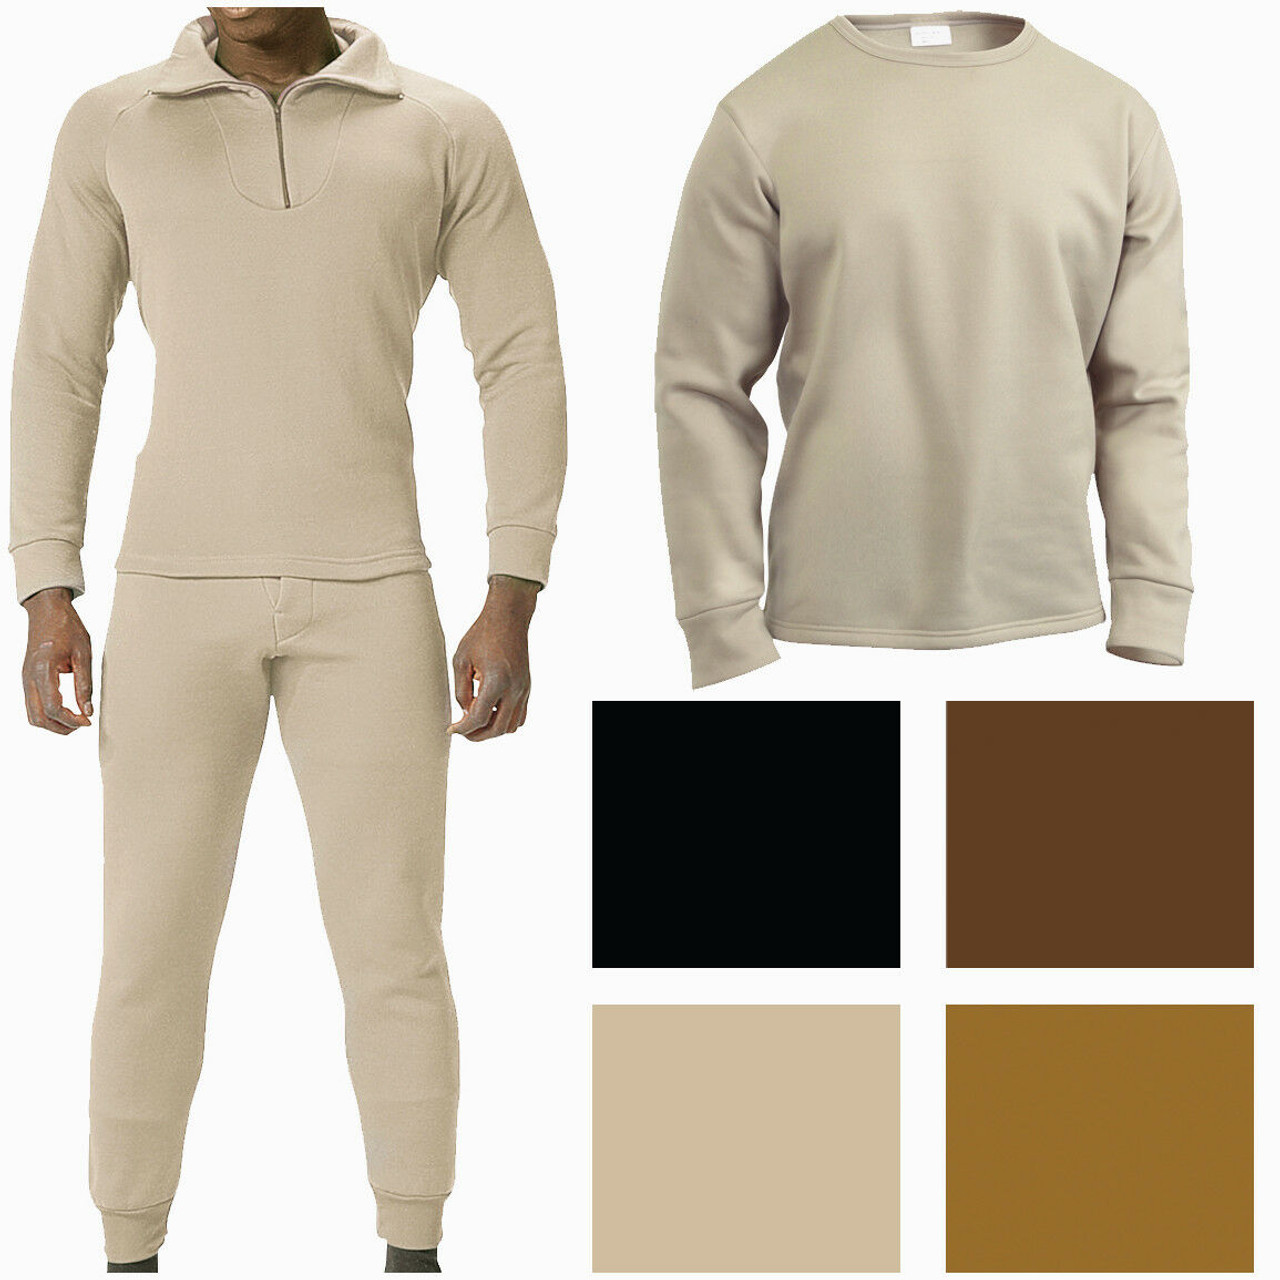 Military Thermal Underwear Extreme Cold Weather Long Johns